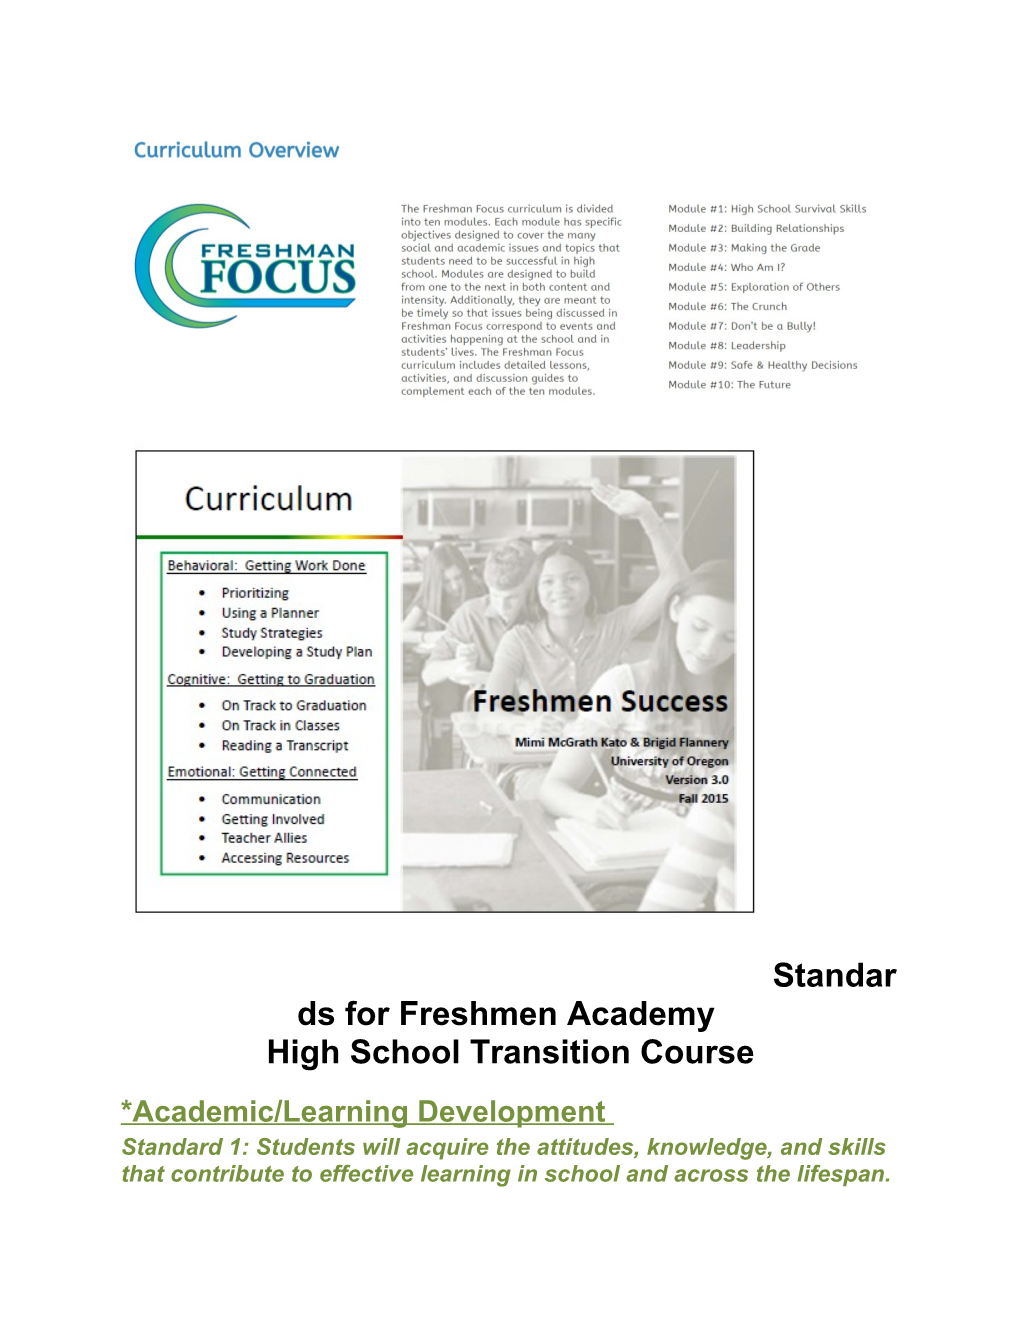 High School Transition Course